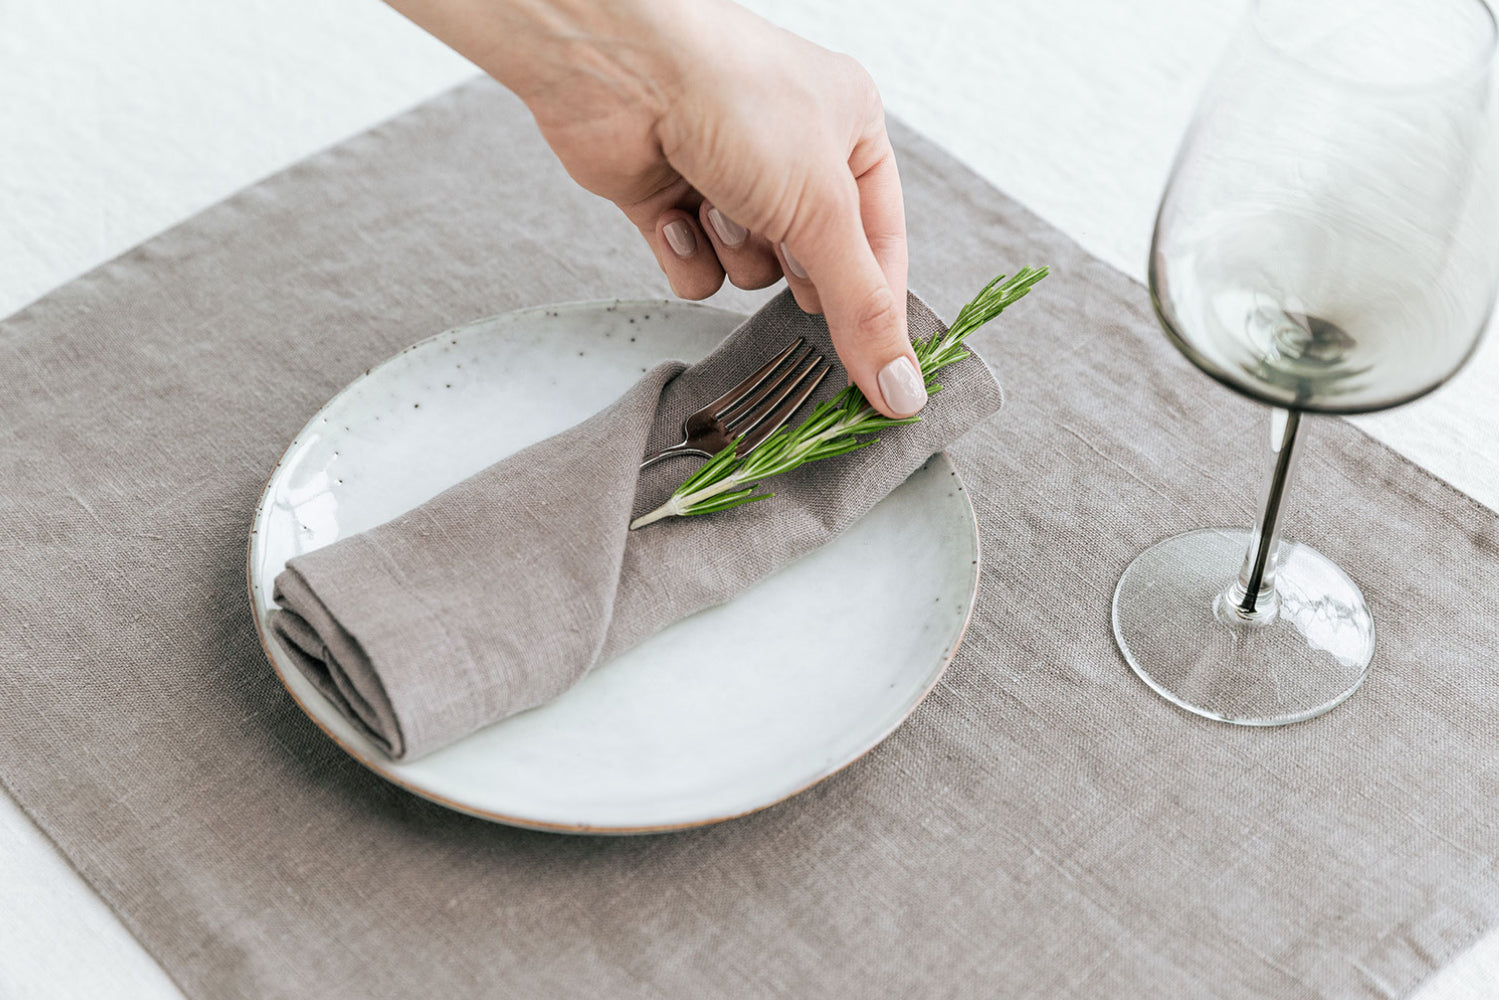 Elevate Your Table Setting with Off-White Linen Cloth Napkins